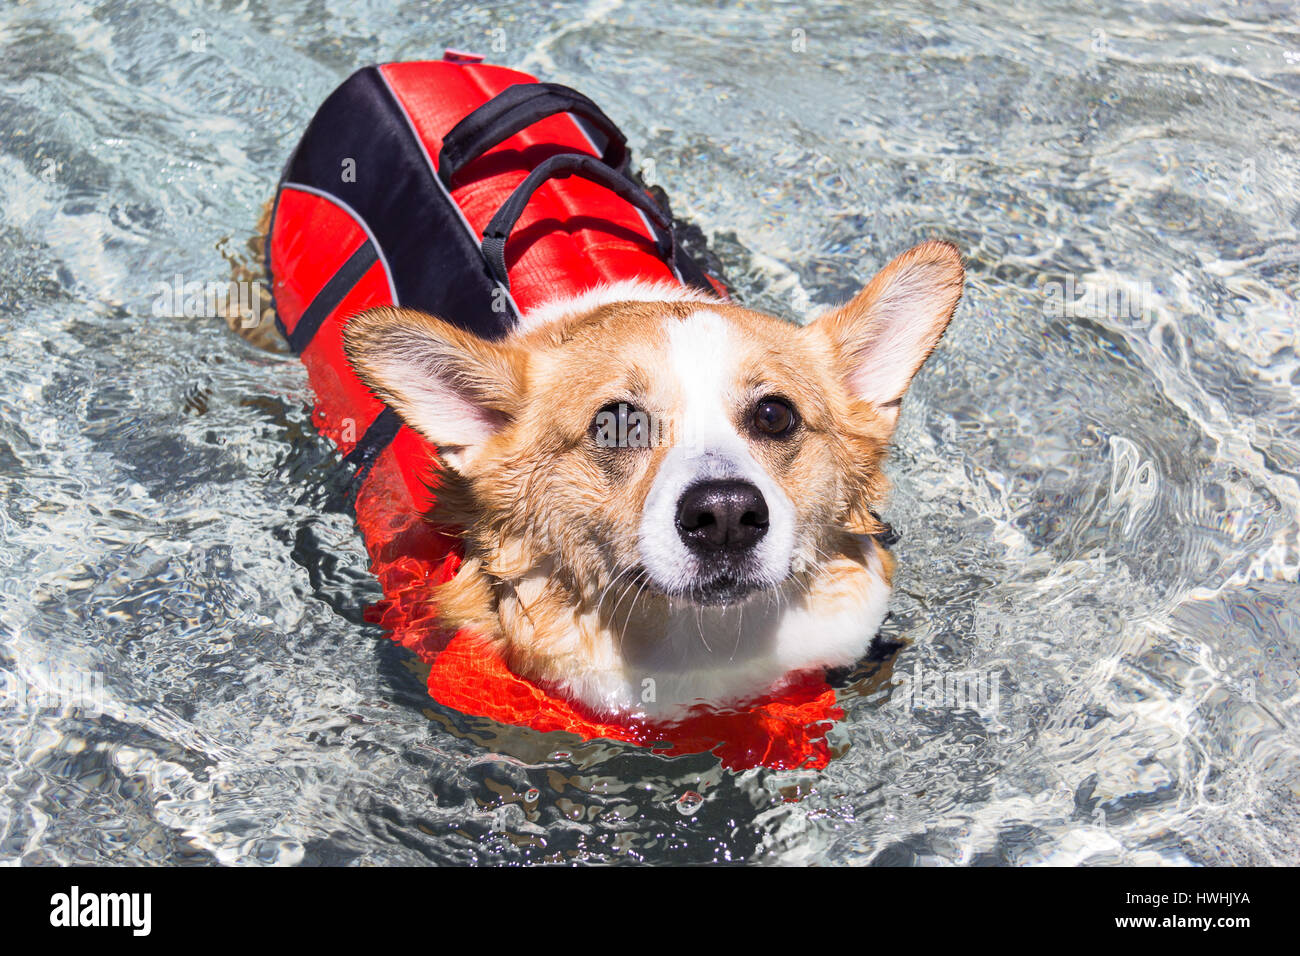 Pembroke Welsh Corgi dog swimming in a pool with a life jacket Stock Photo